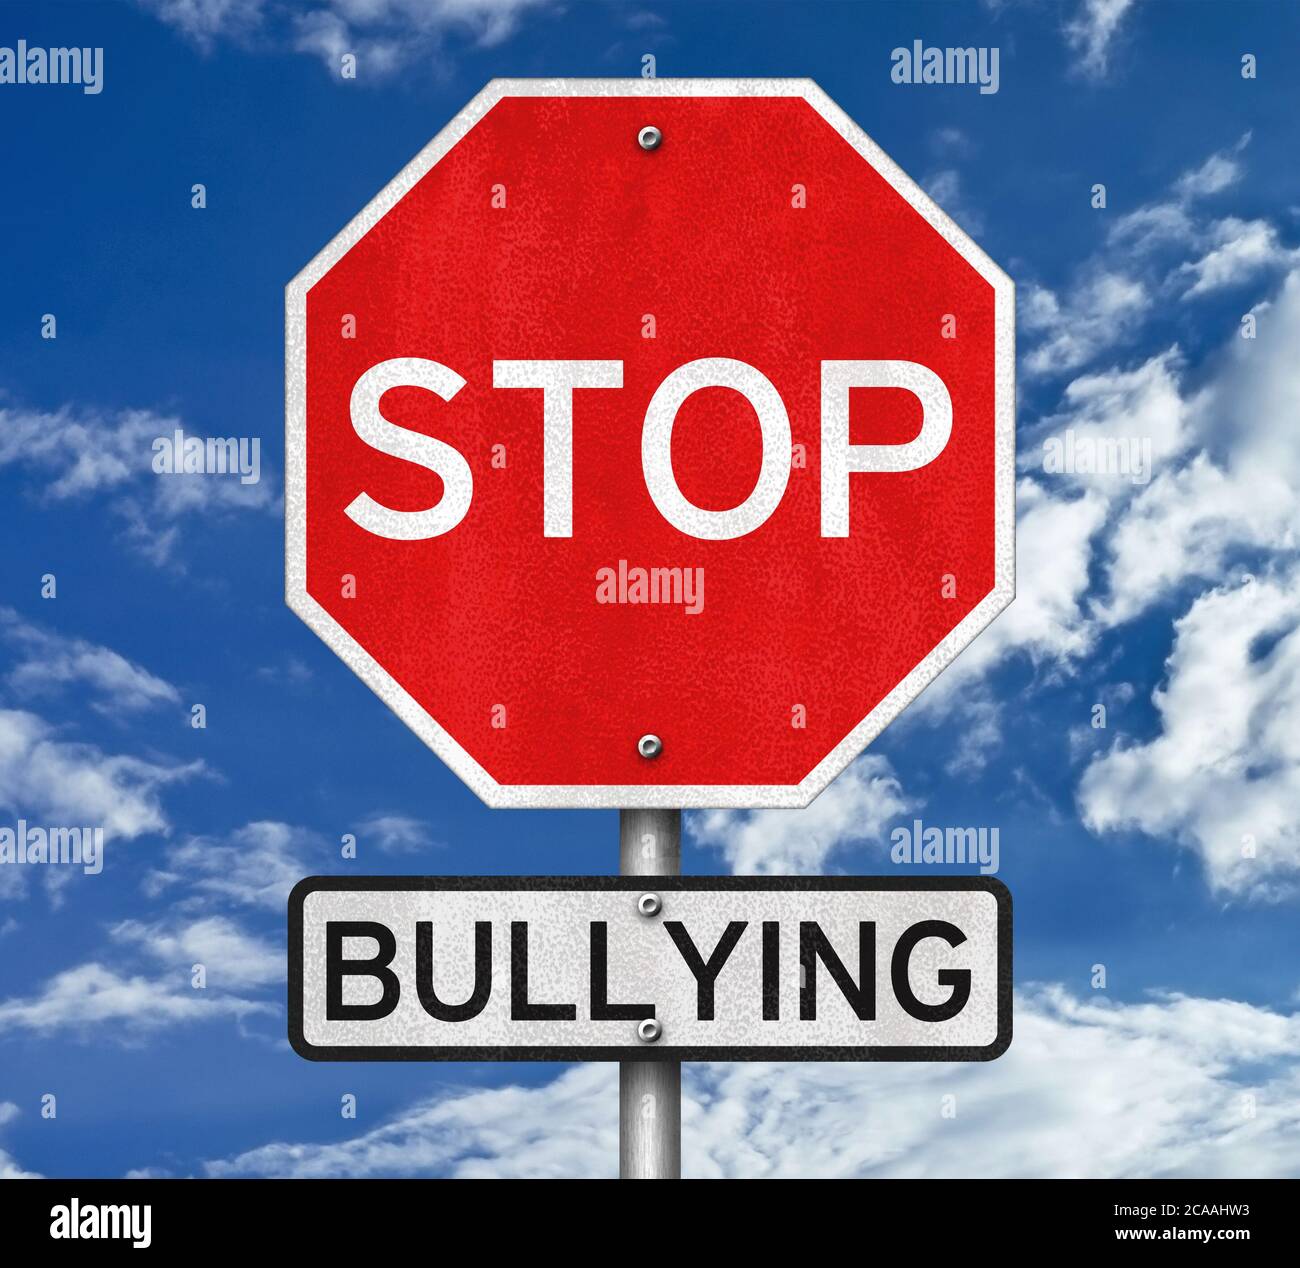 stop bullying - road sign Stock Photo